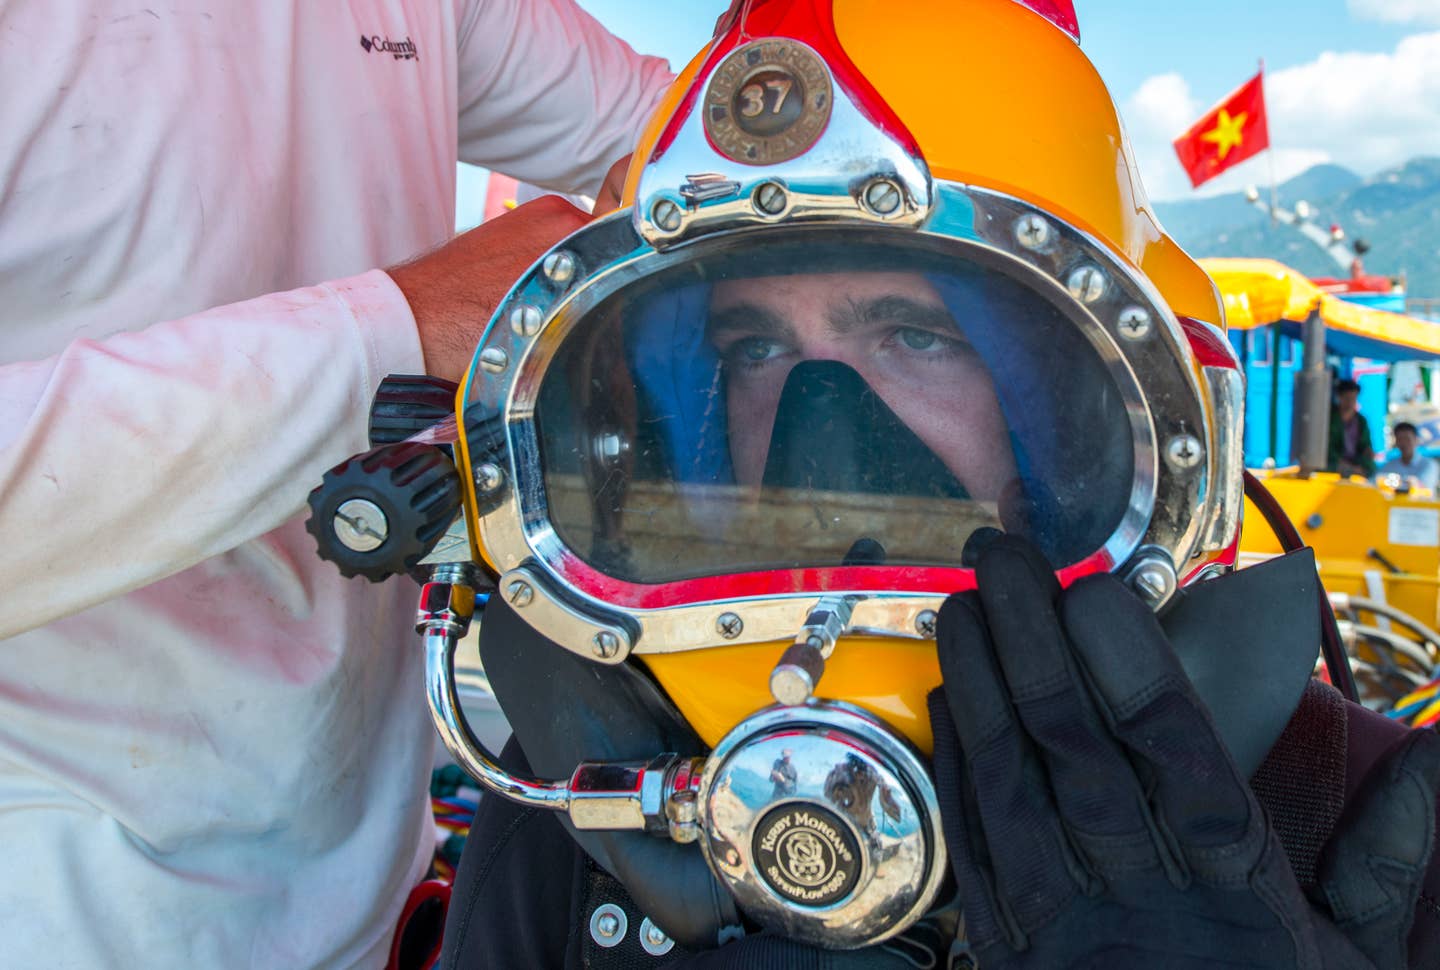 Spc. Douglas Adams, a diver with the 7th Engineer Dive Detachment, puts on his diving helmet before he heads 80 feet below the surface as part of an underwater recovery mission near Nha Trang, Vietnam, March 19, 2018.